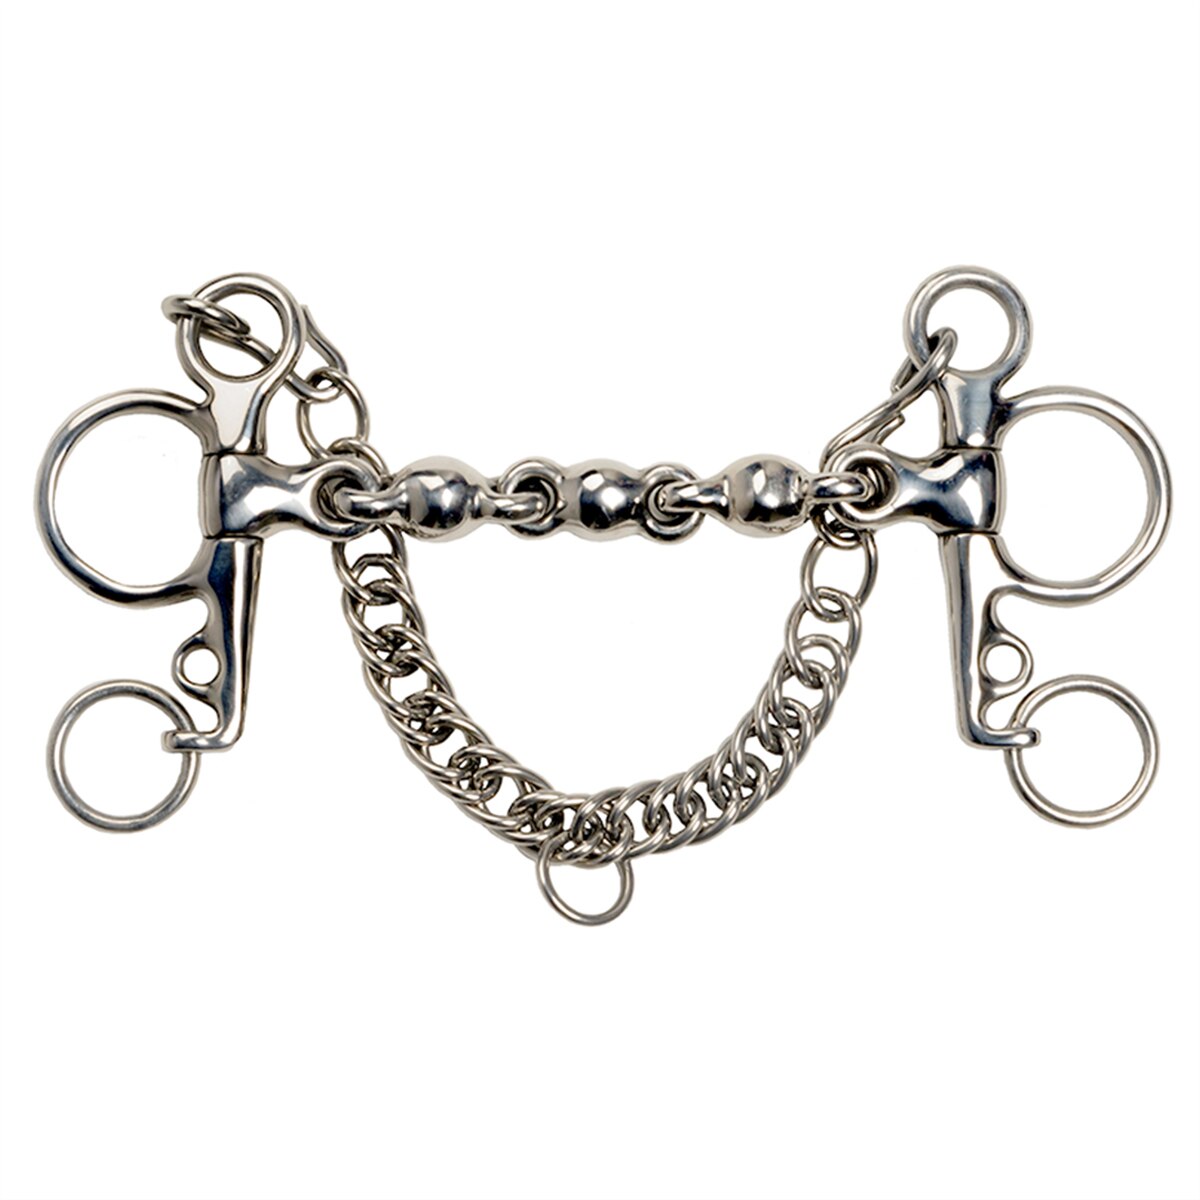 Shires Medium Port Mouth Pelham Bit Stainless Steel with Curb Chain